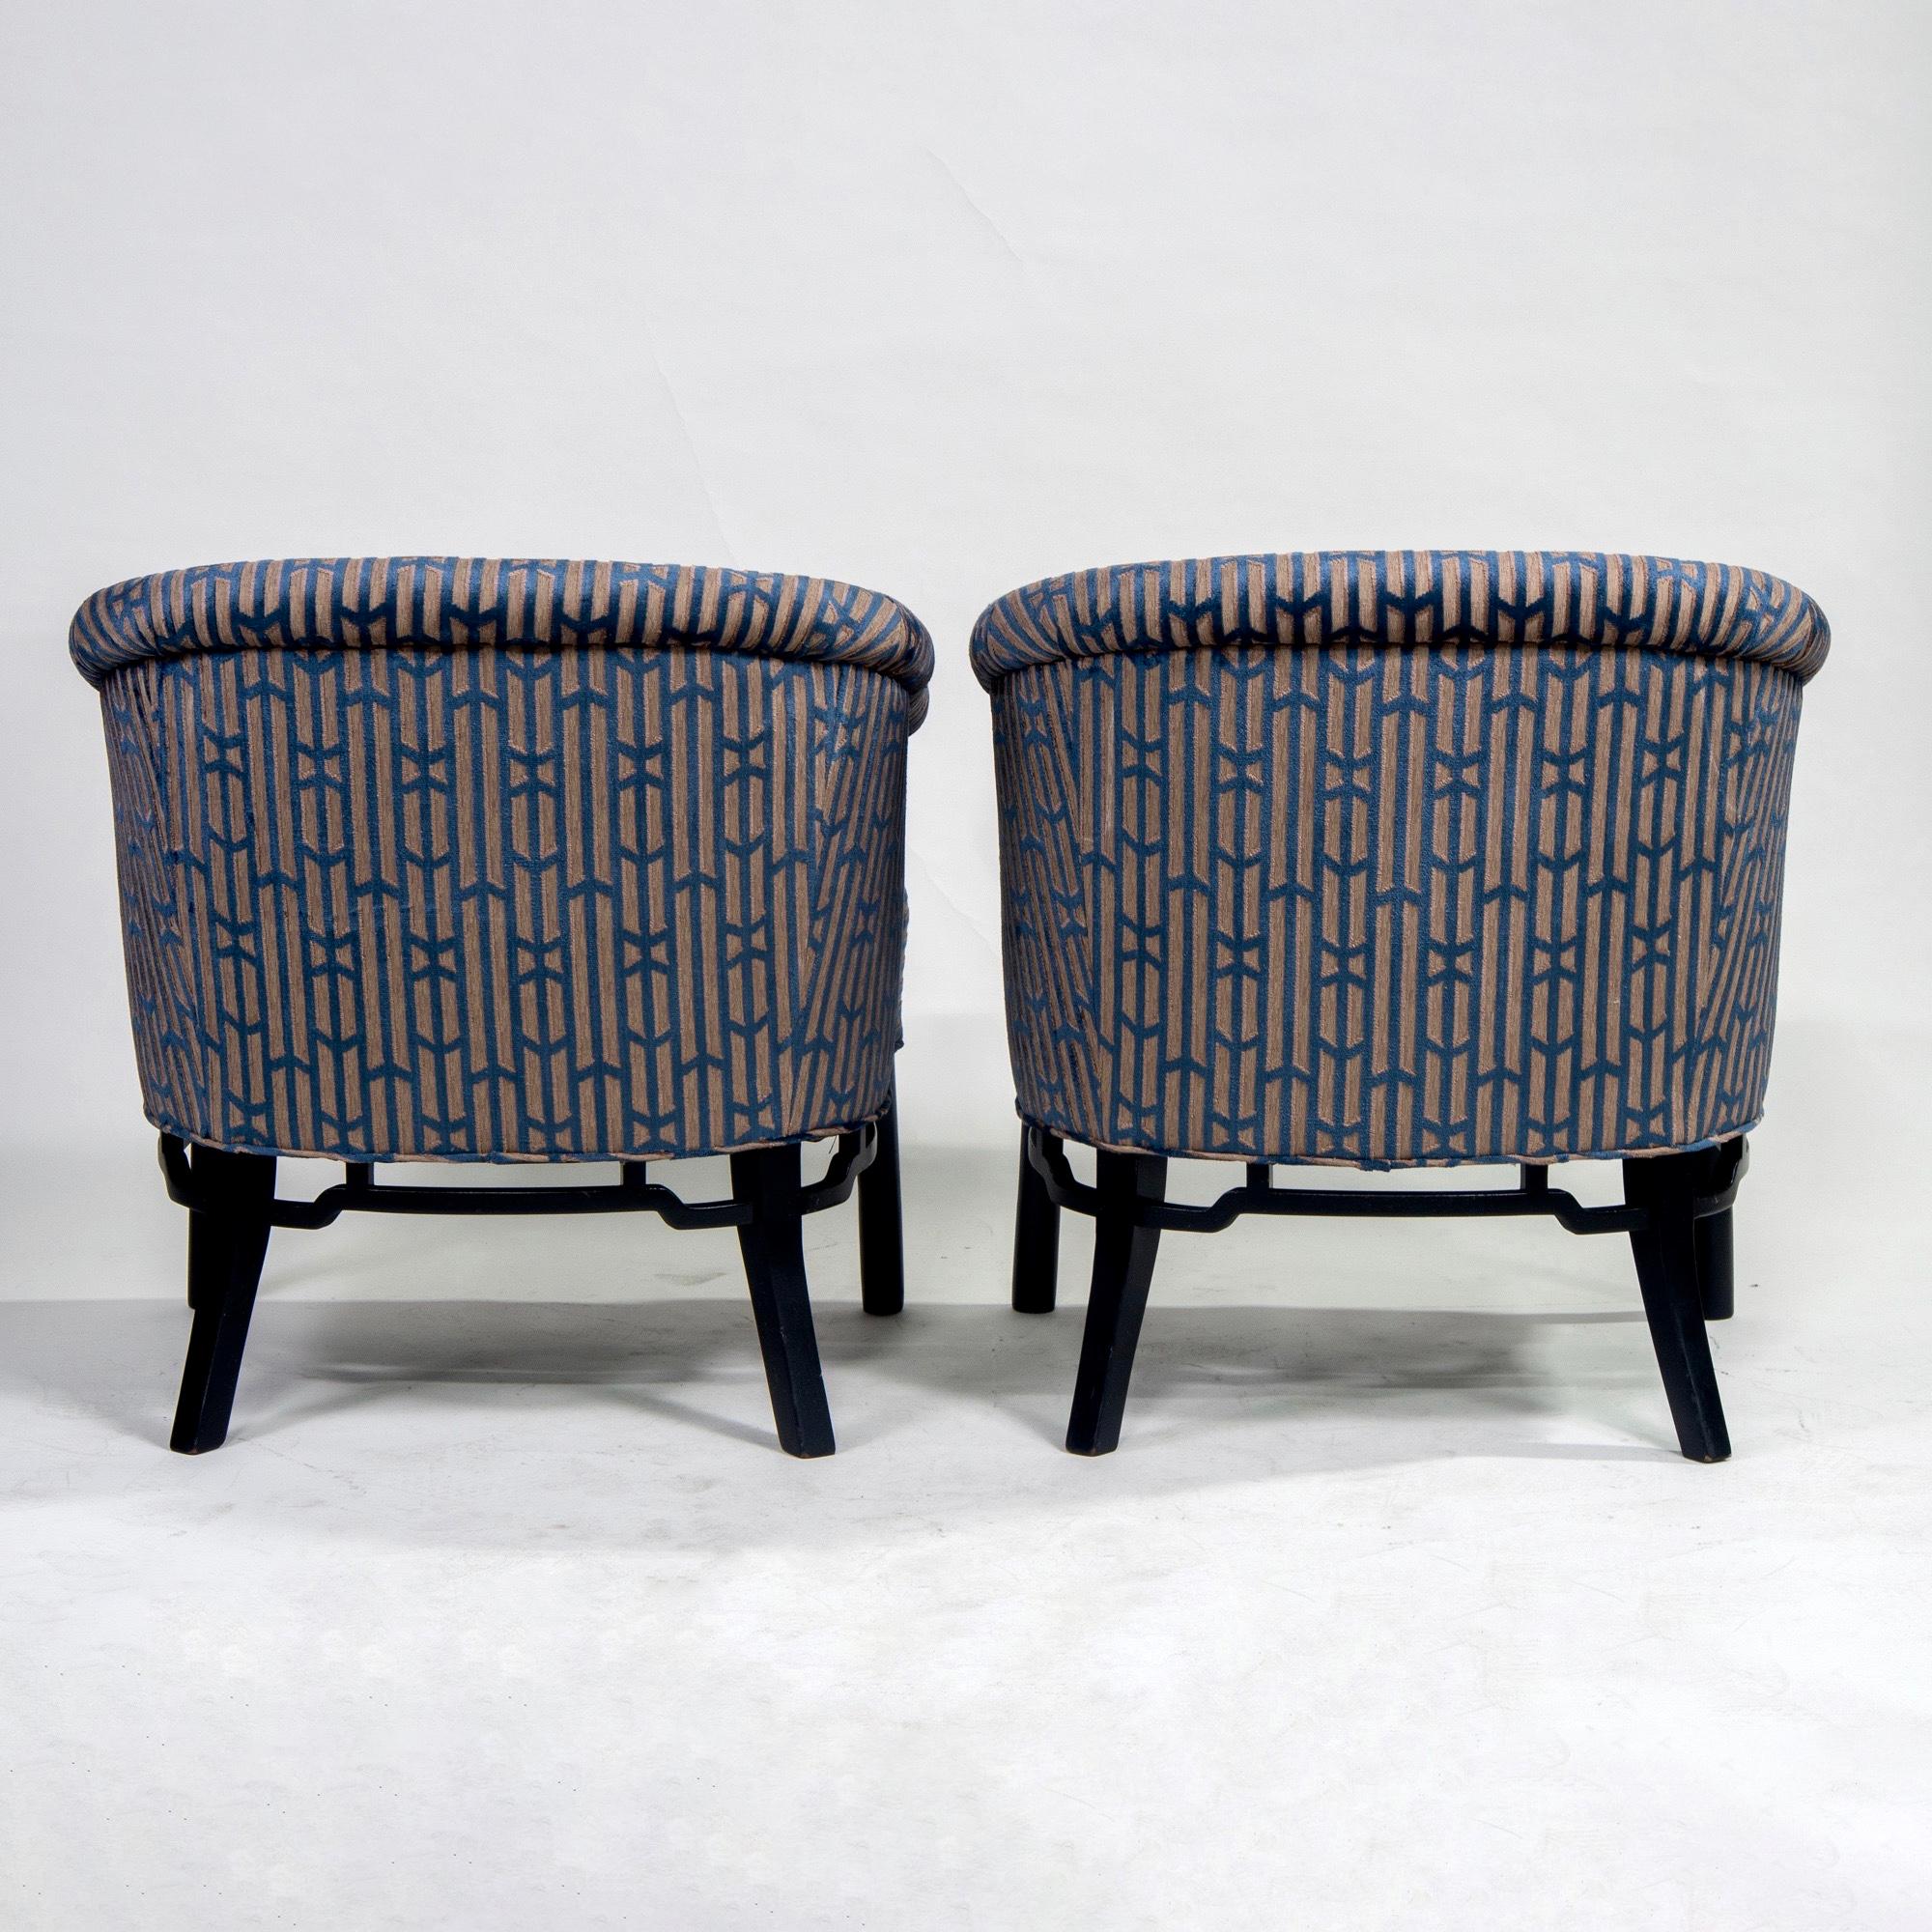 Pair of Midcentury Baker Club Chairs with New Upholstery 1